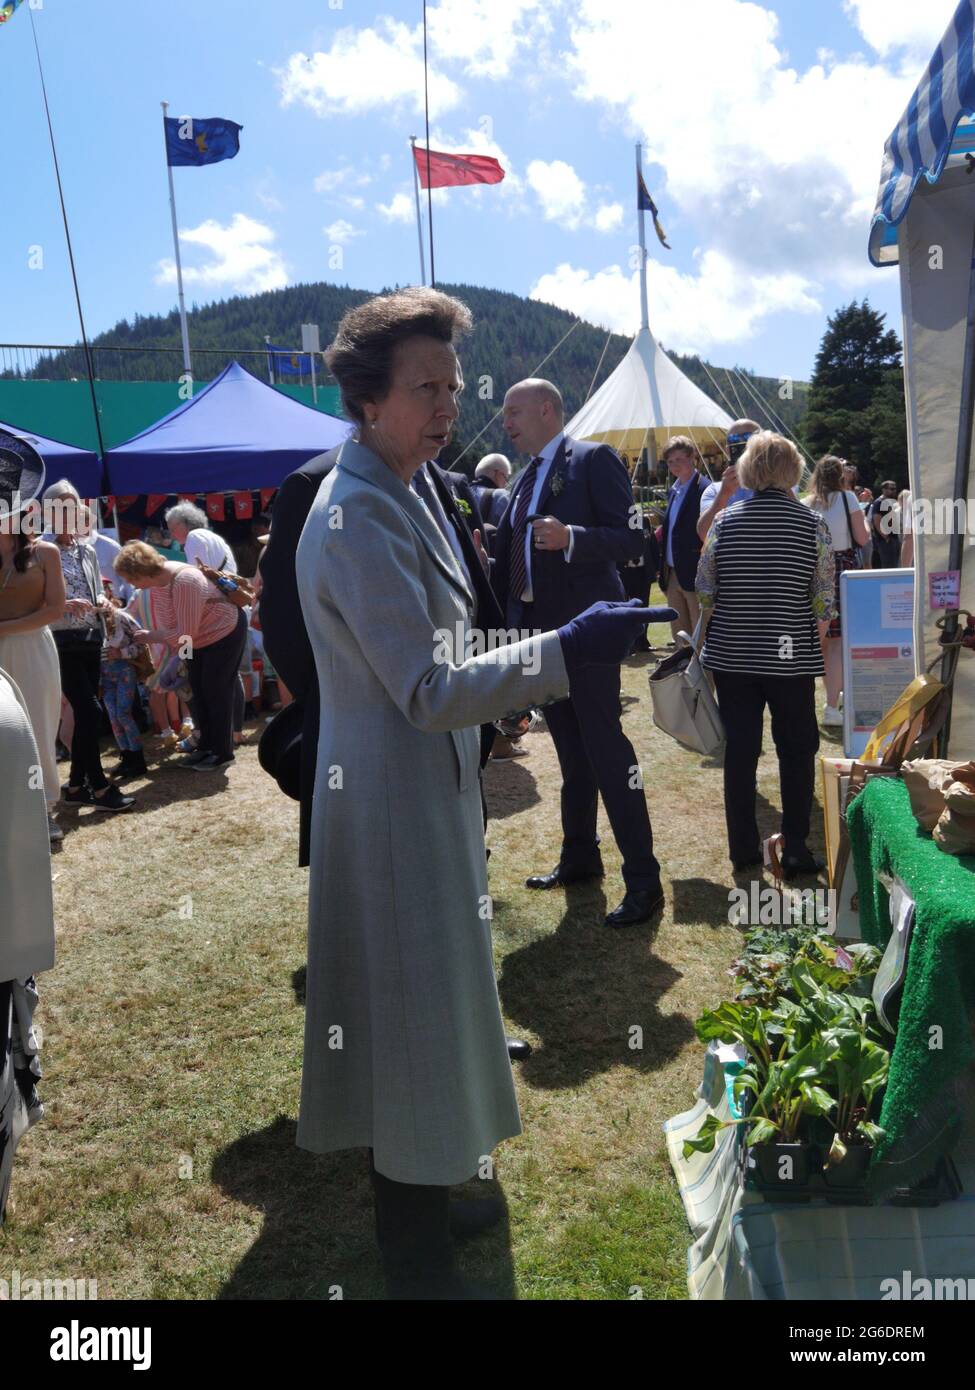 5 July 2021, St Johns, Isle of Man. No social distancing or masks. Her Royal Highness, Princess Anne, Princess Royal of the United Kingdom greeting people at a fair on an official visit to the Isle of Man where she presided over the open air sitting of Tynwald (the Parliament of the Isle of Man). The Princess seemed to enjoy her visit and was very generous with her time. She is shown here visiting a local farm shop at the Tynwald fair. The Isle of Man opened borders to non-residents on 28 June 2021 and has very few social distancing requirements (https://covid19.gov.im/). Stock Photo